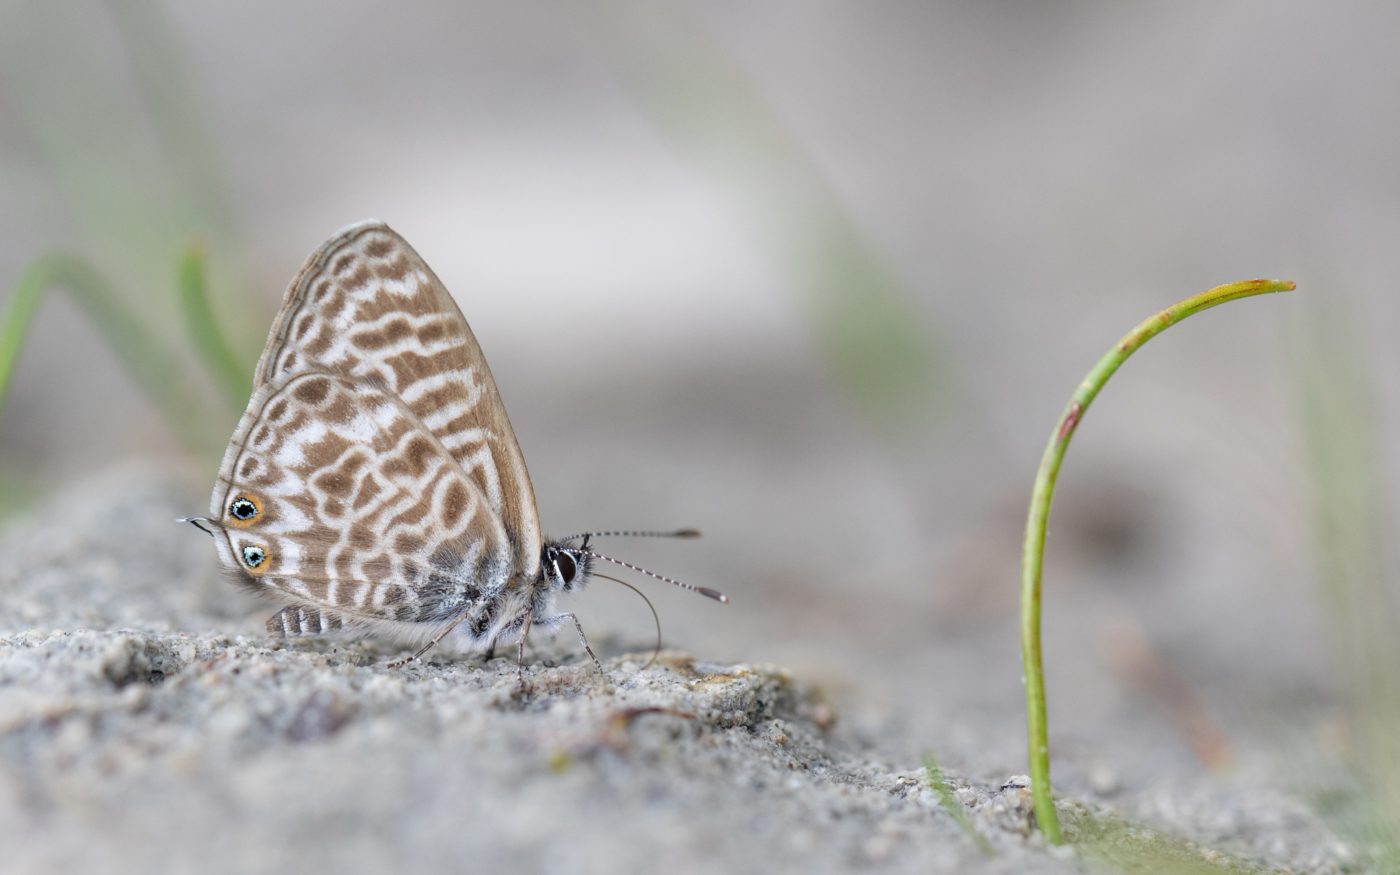 Lang's Short-tailed Blue butterfly, Leptotes pirithous, on sandy soil